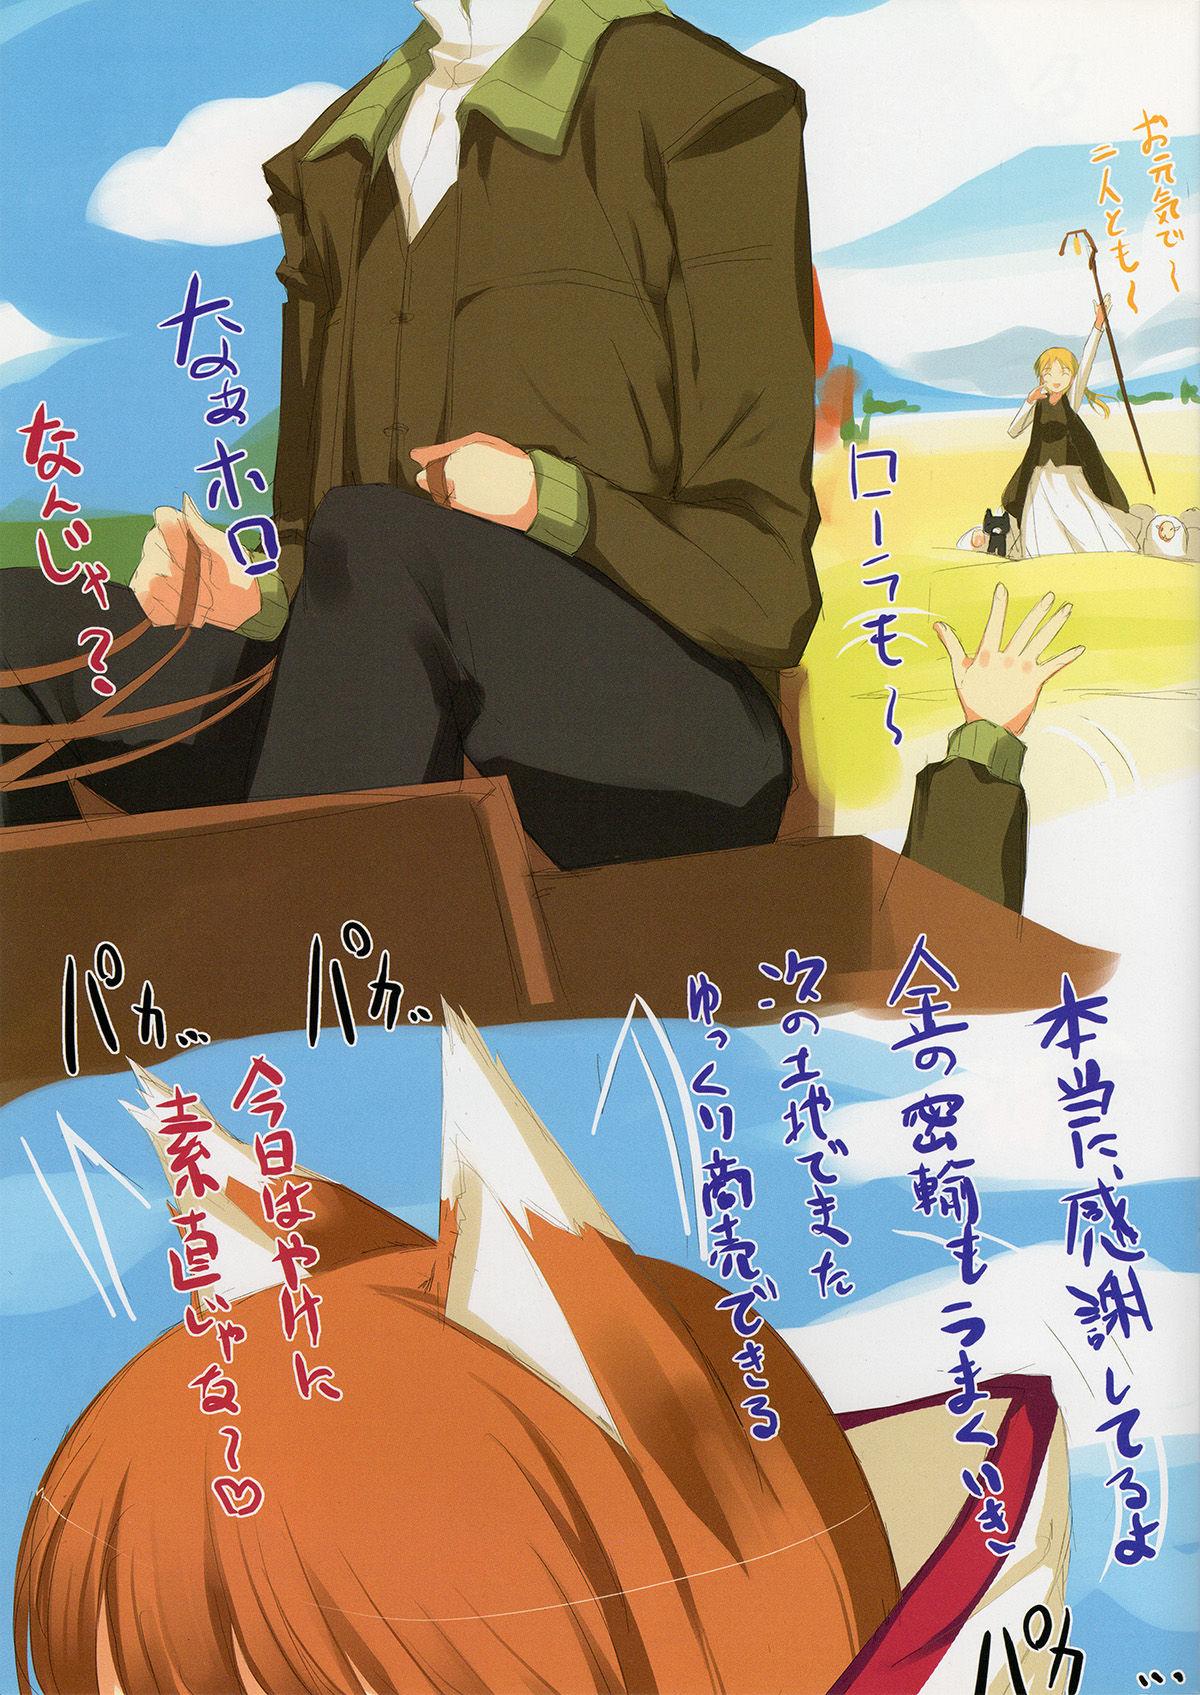 Rough Sex Ookami no Kimagure Hon - Spice and wolf Mmd - Page 2